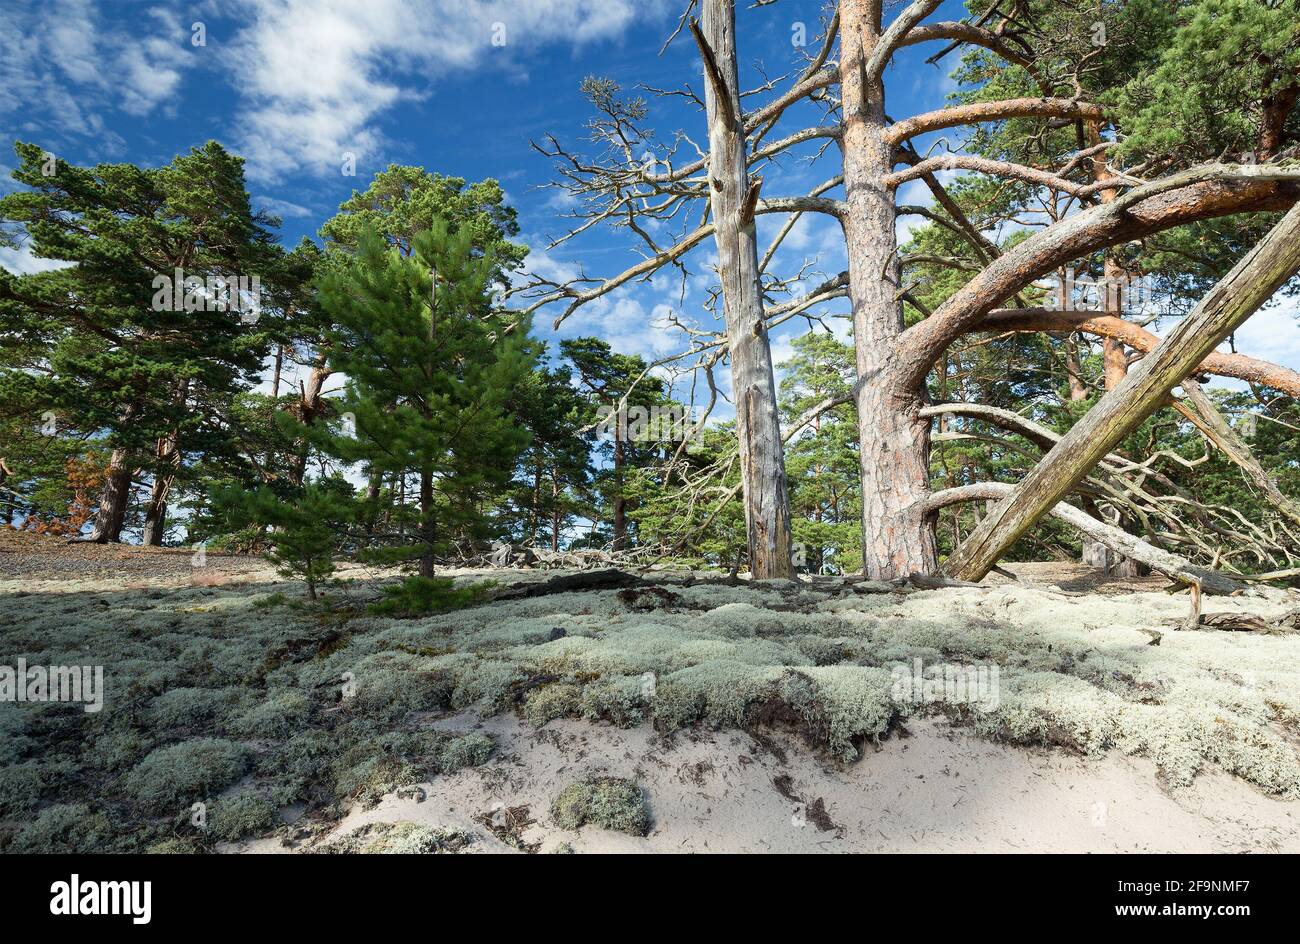 Dry pine trees in sandy environment Stock Photo